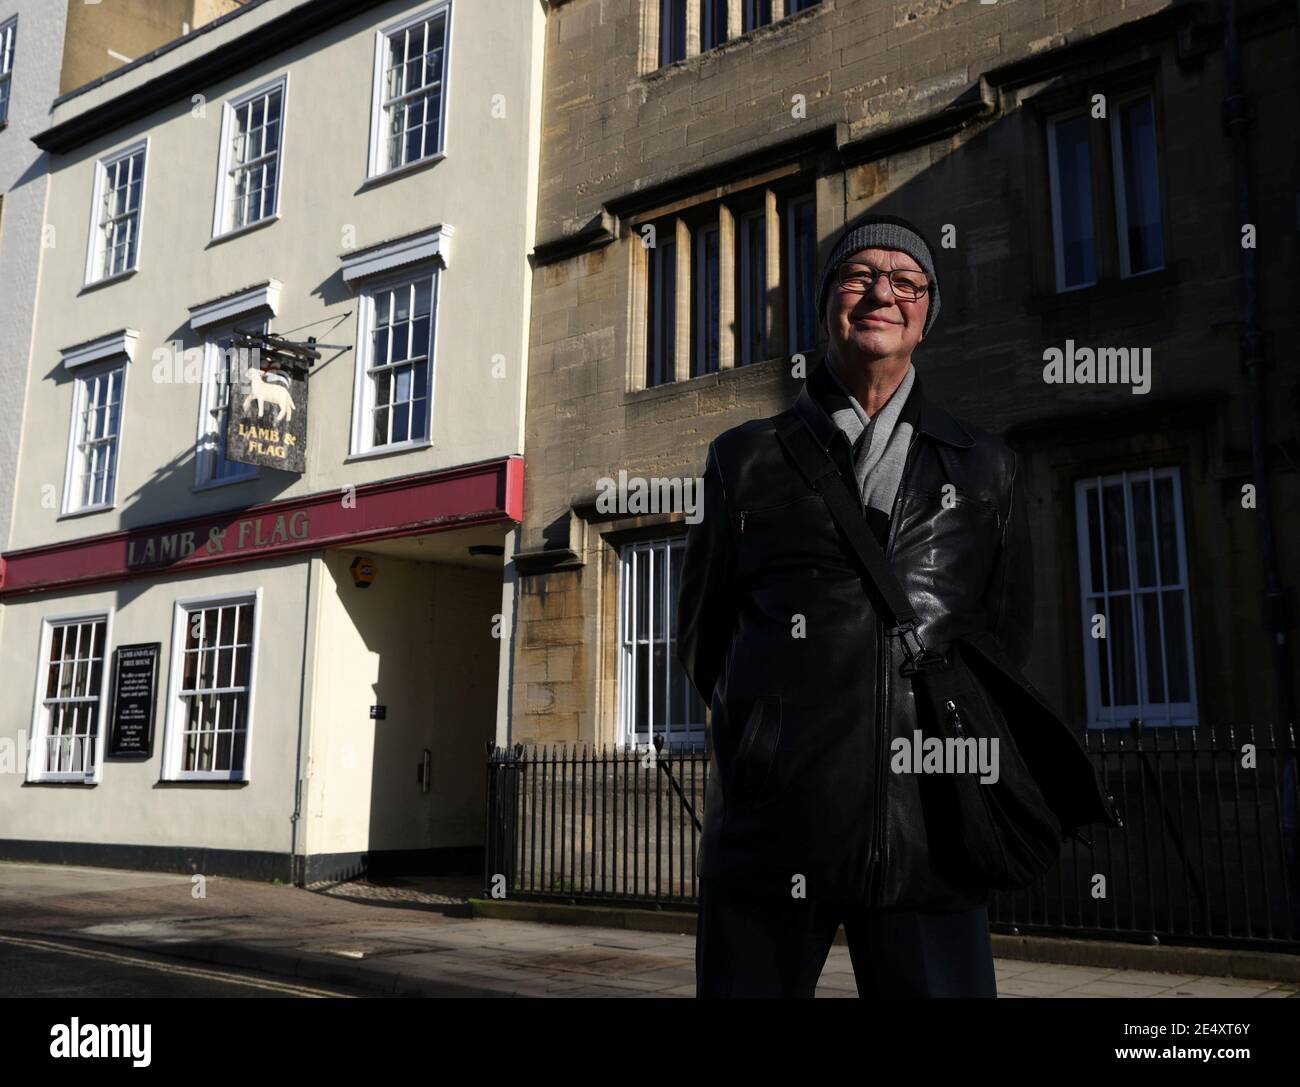 Spokesman for CAMRA (Campaign for Real Ale) Dave Richardson poses for a photograph outside The Lamb and Flag, the Grade-II listed pub being forced to close after more than 400 years of business, following outbreak of the coronavirus disease (COVID-19) pandemic, in central Oxford, Britain, January 25, 2021.  REUTERS/Eddie Keogh Stock Photo